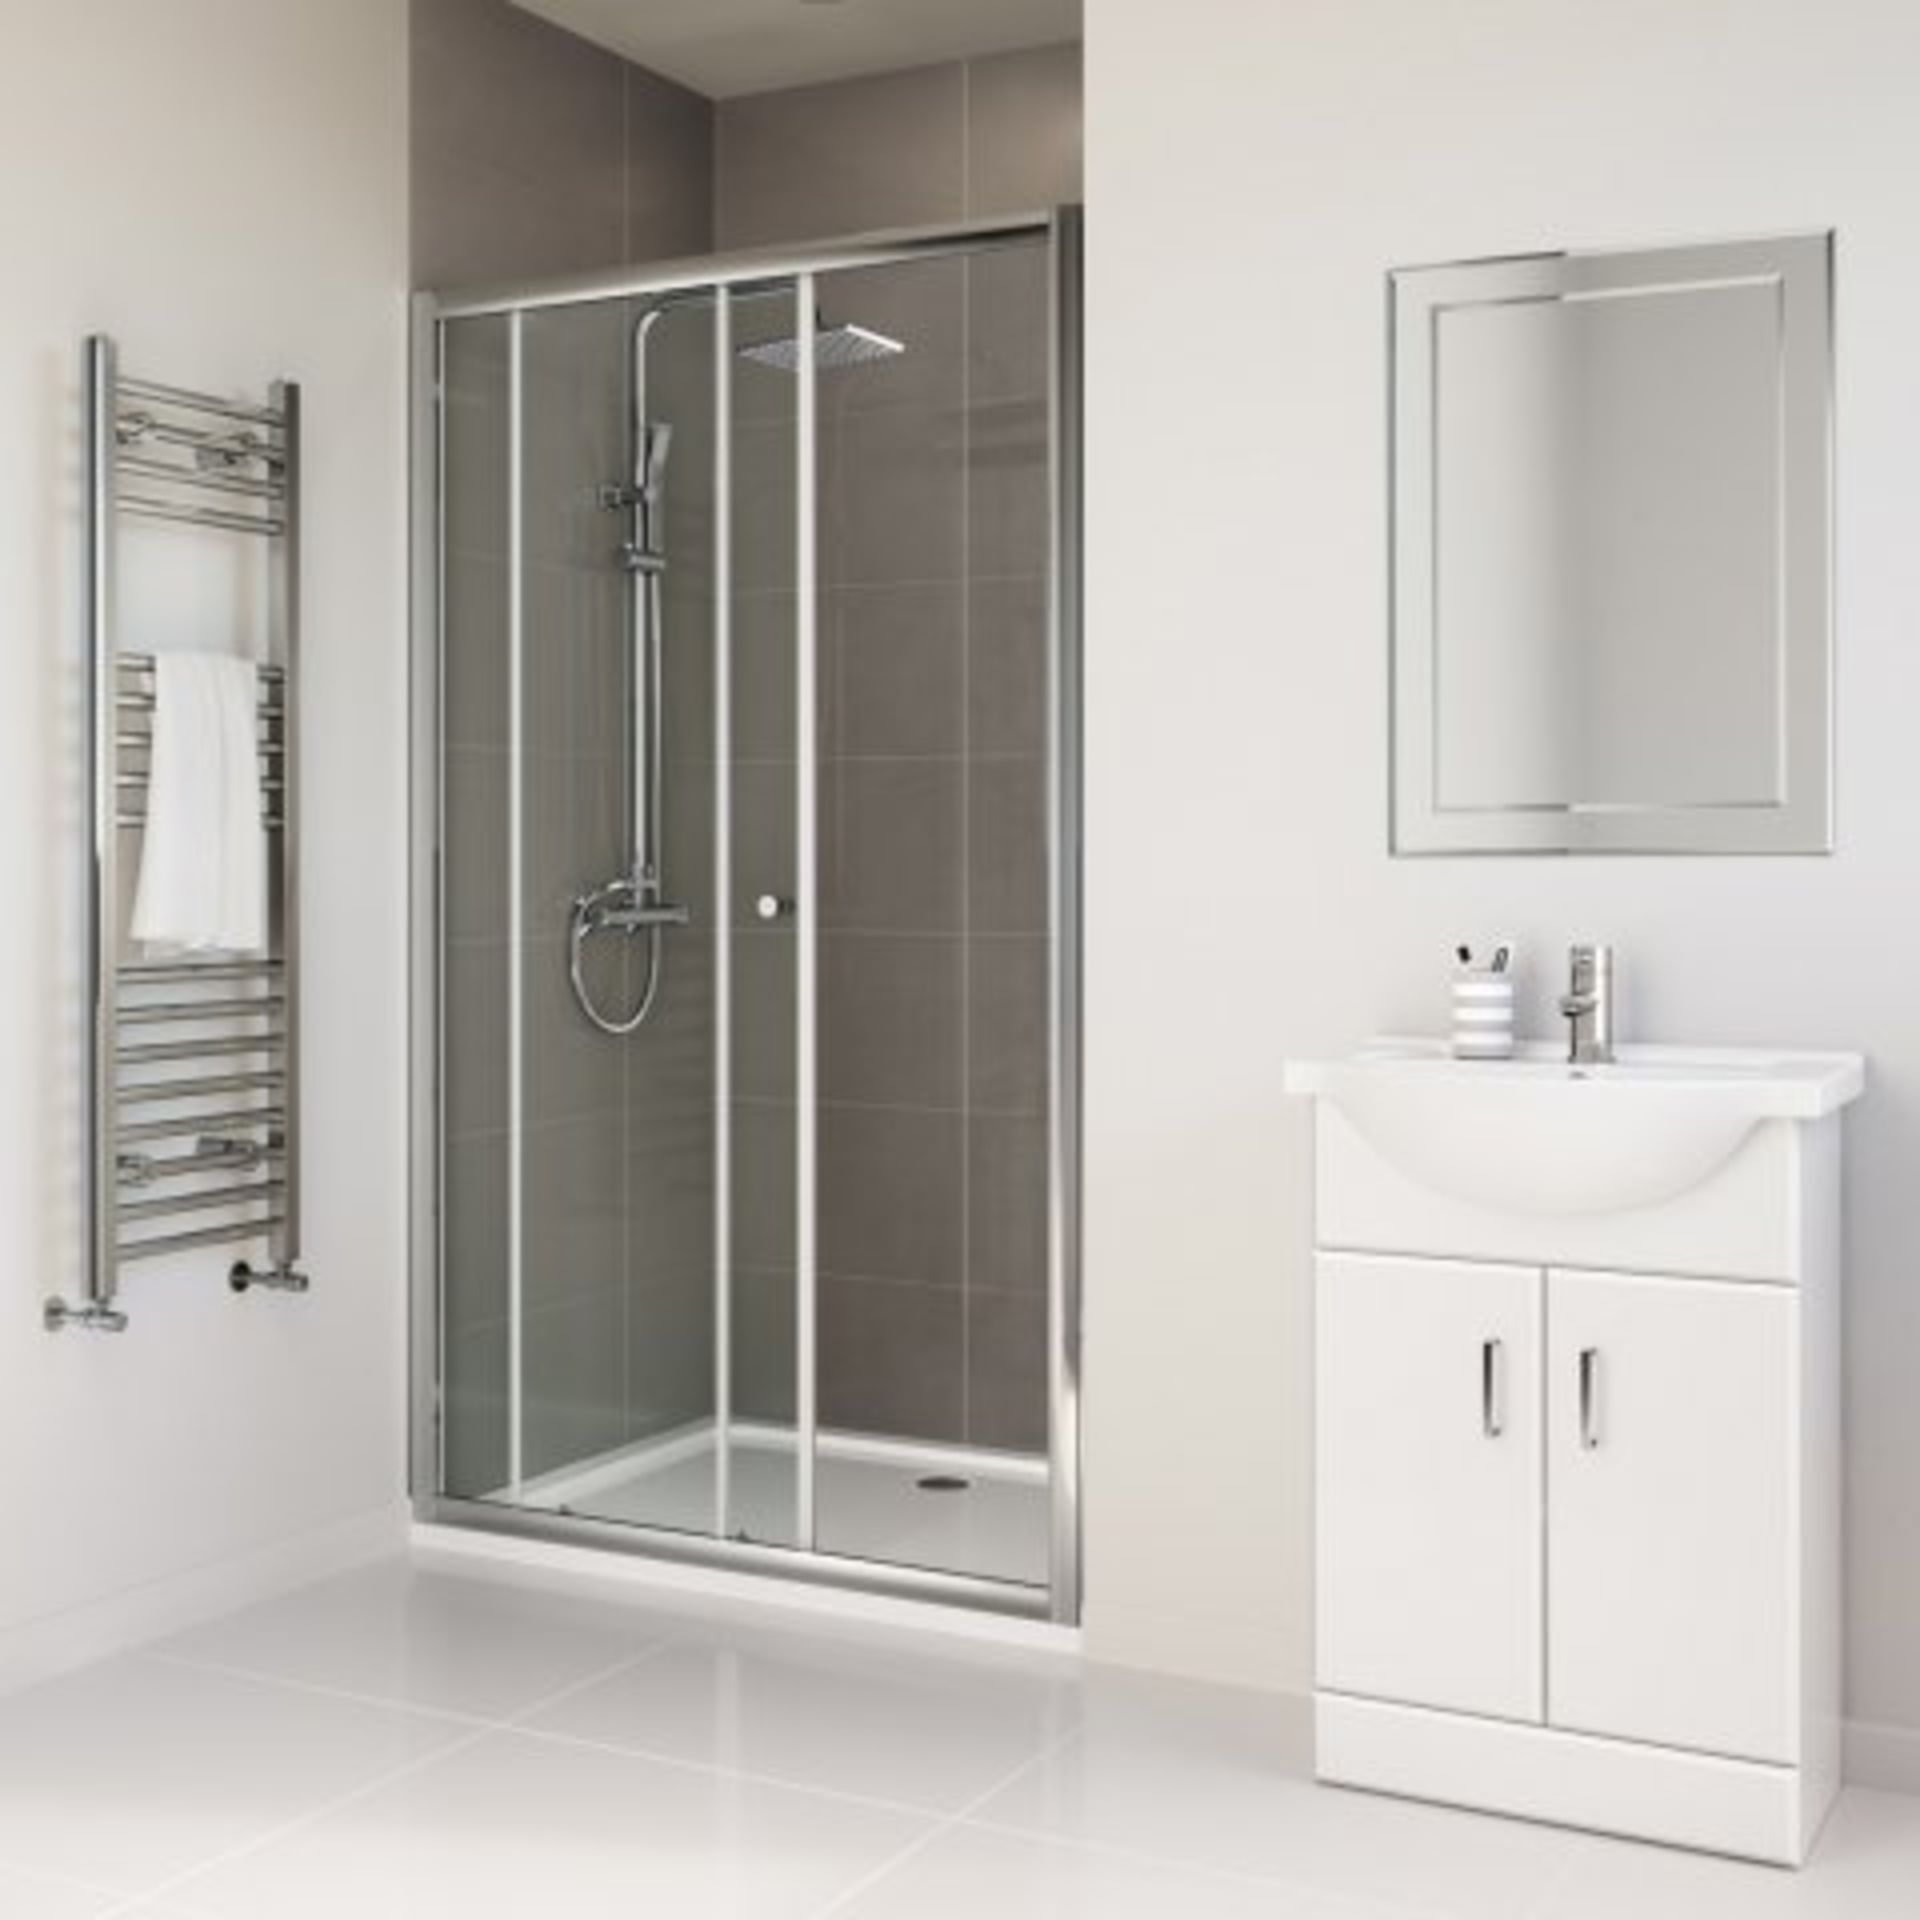 (N116) 1200mm - Elements Sliding Shower Door. RRP £299.99. Designed and crafted to improve the decor - Image 5 of 5